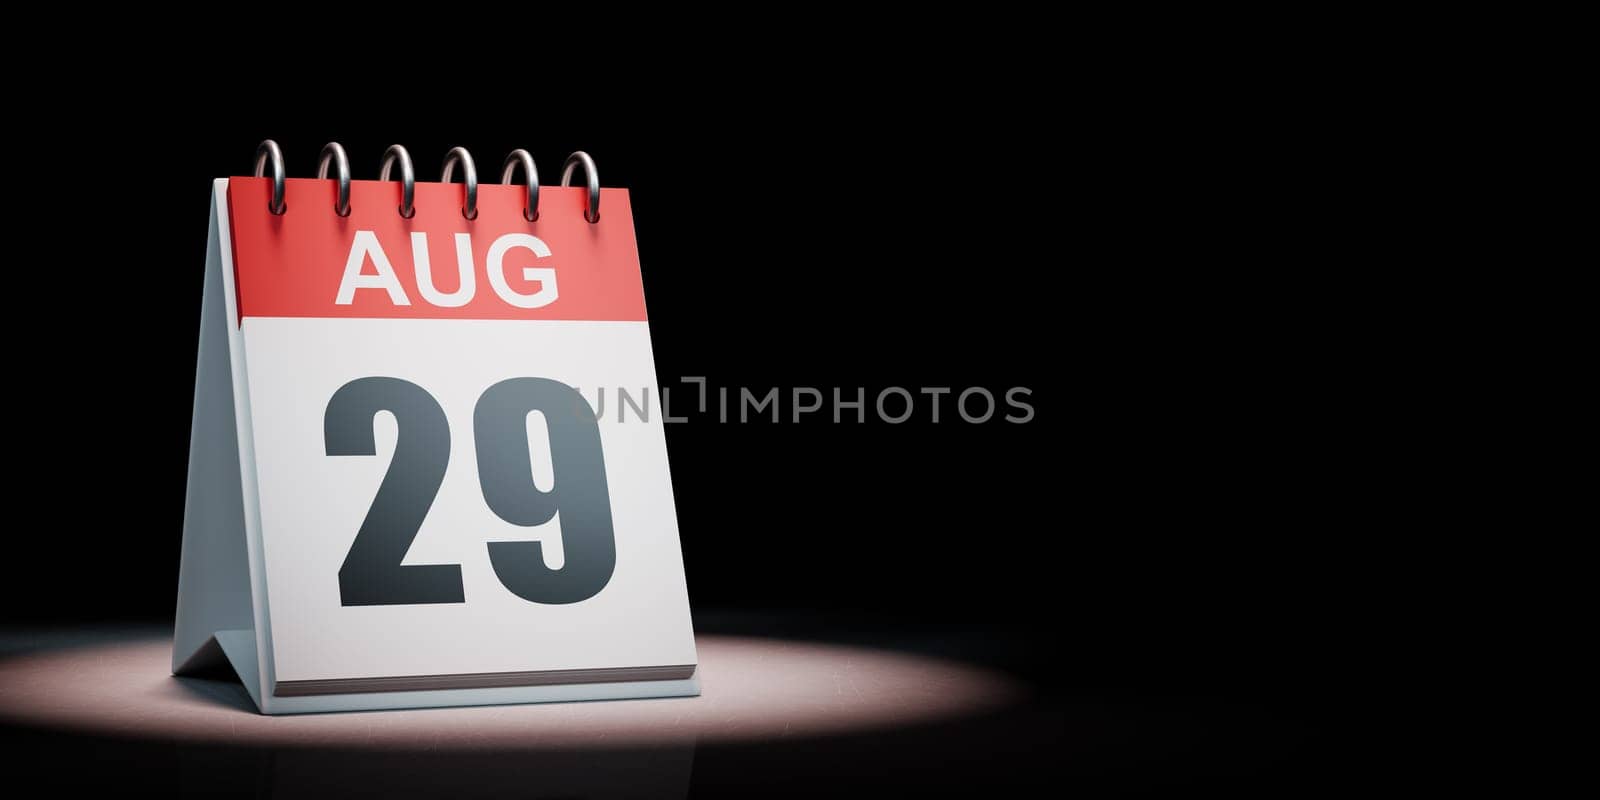 Red and White August 29 Desk Calendar Spotlighted on Black Background with Copy Space 3D Illustration